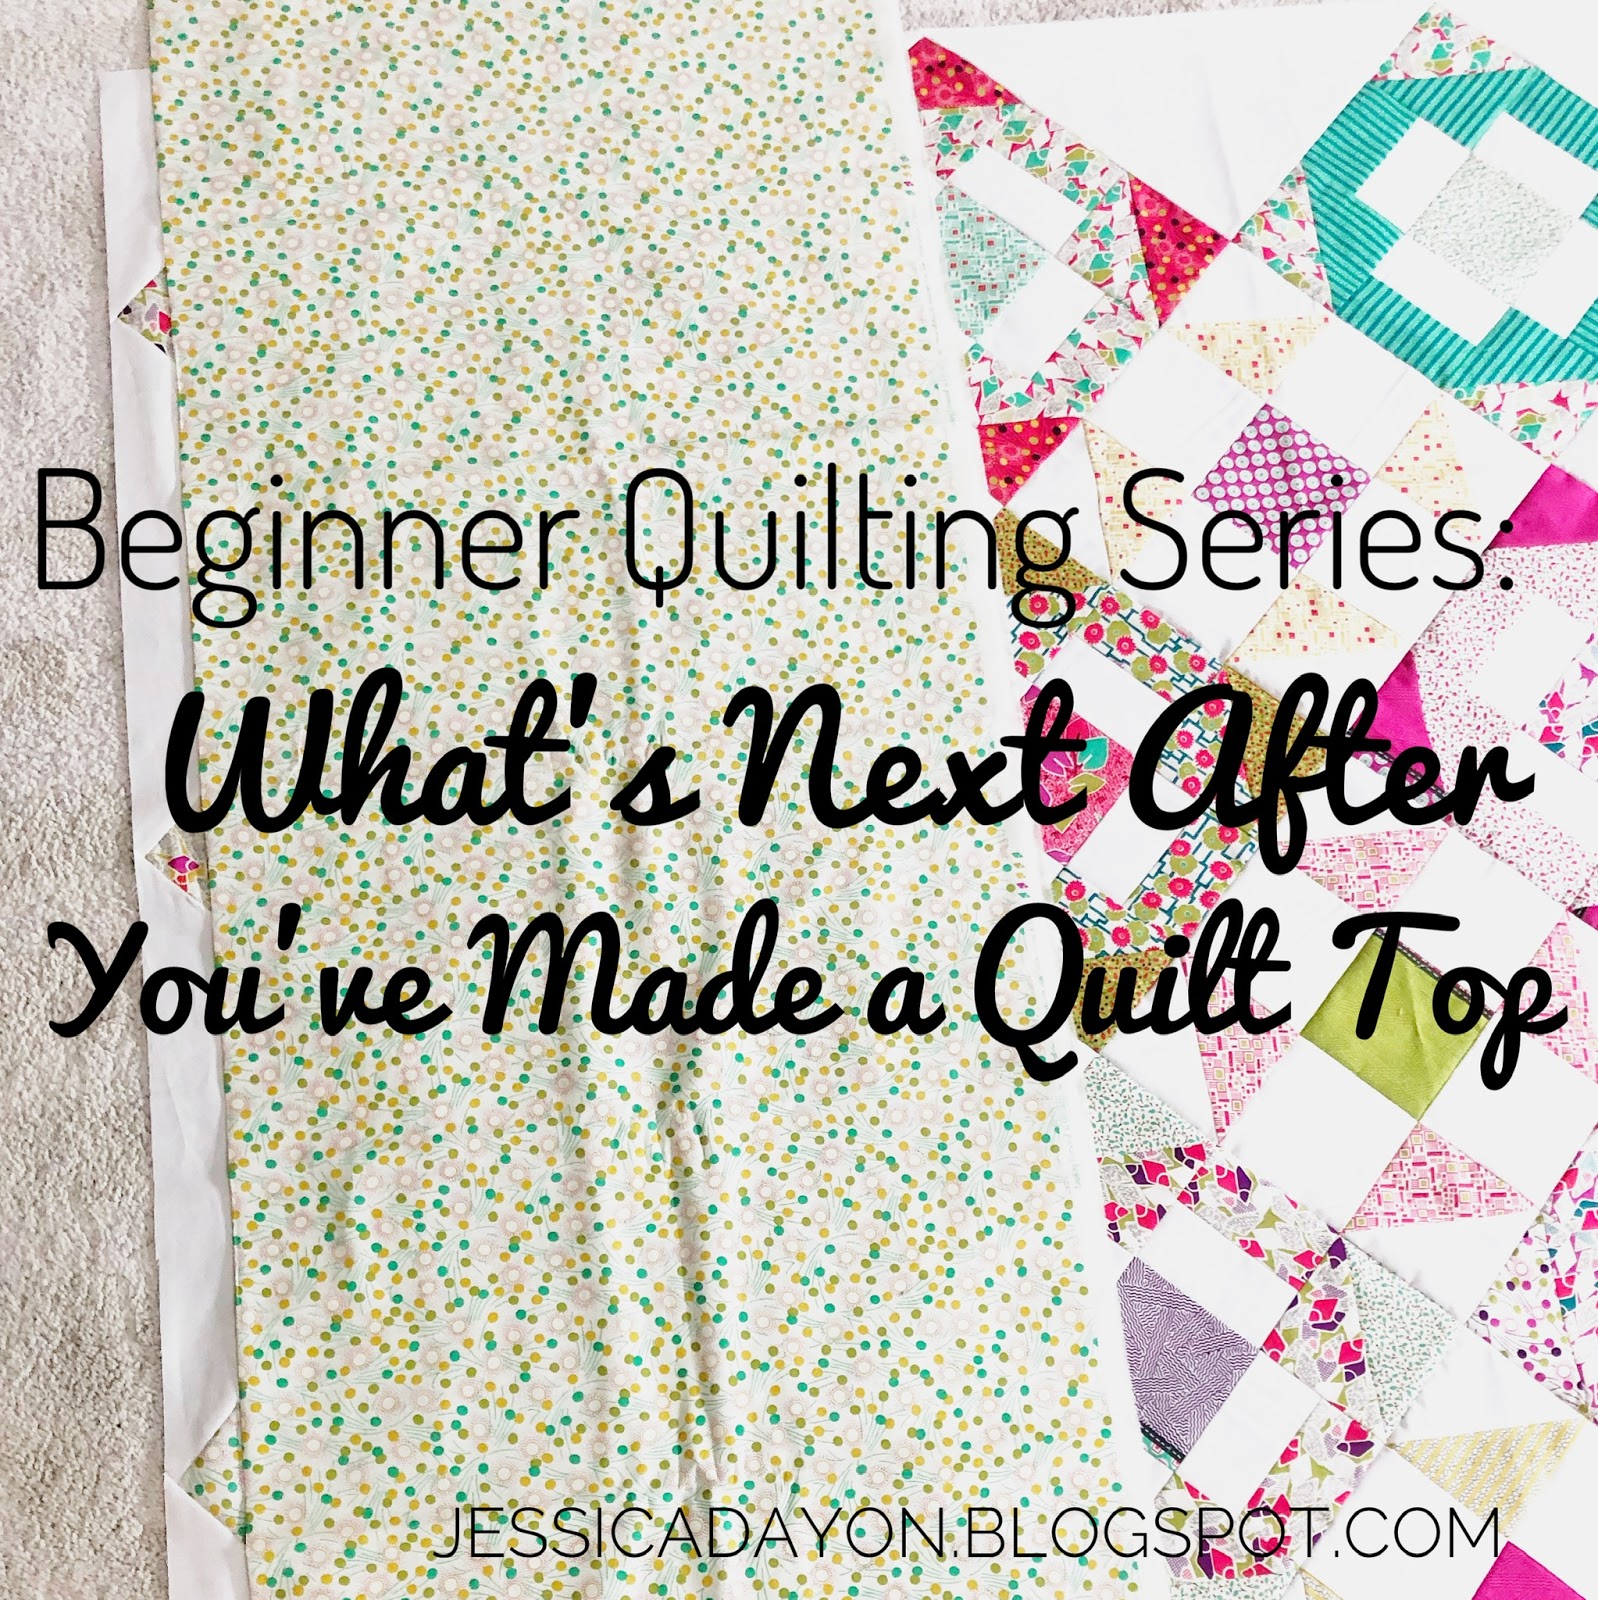 Why Wool Batting Makes the Warmest Quilts - Suzy Quilts